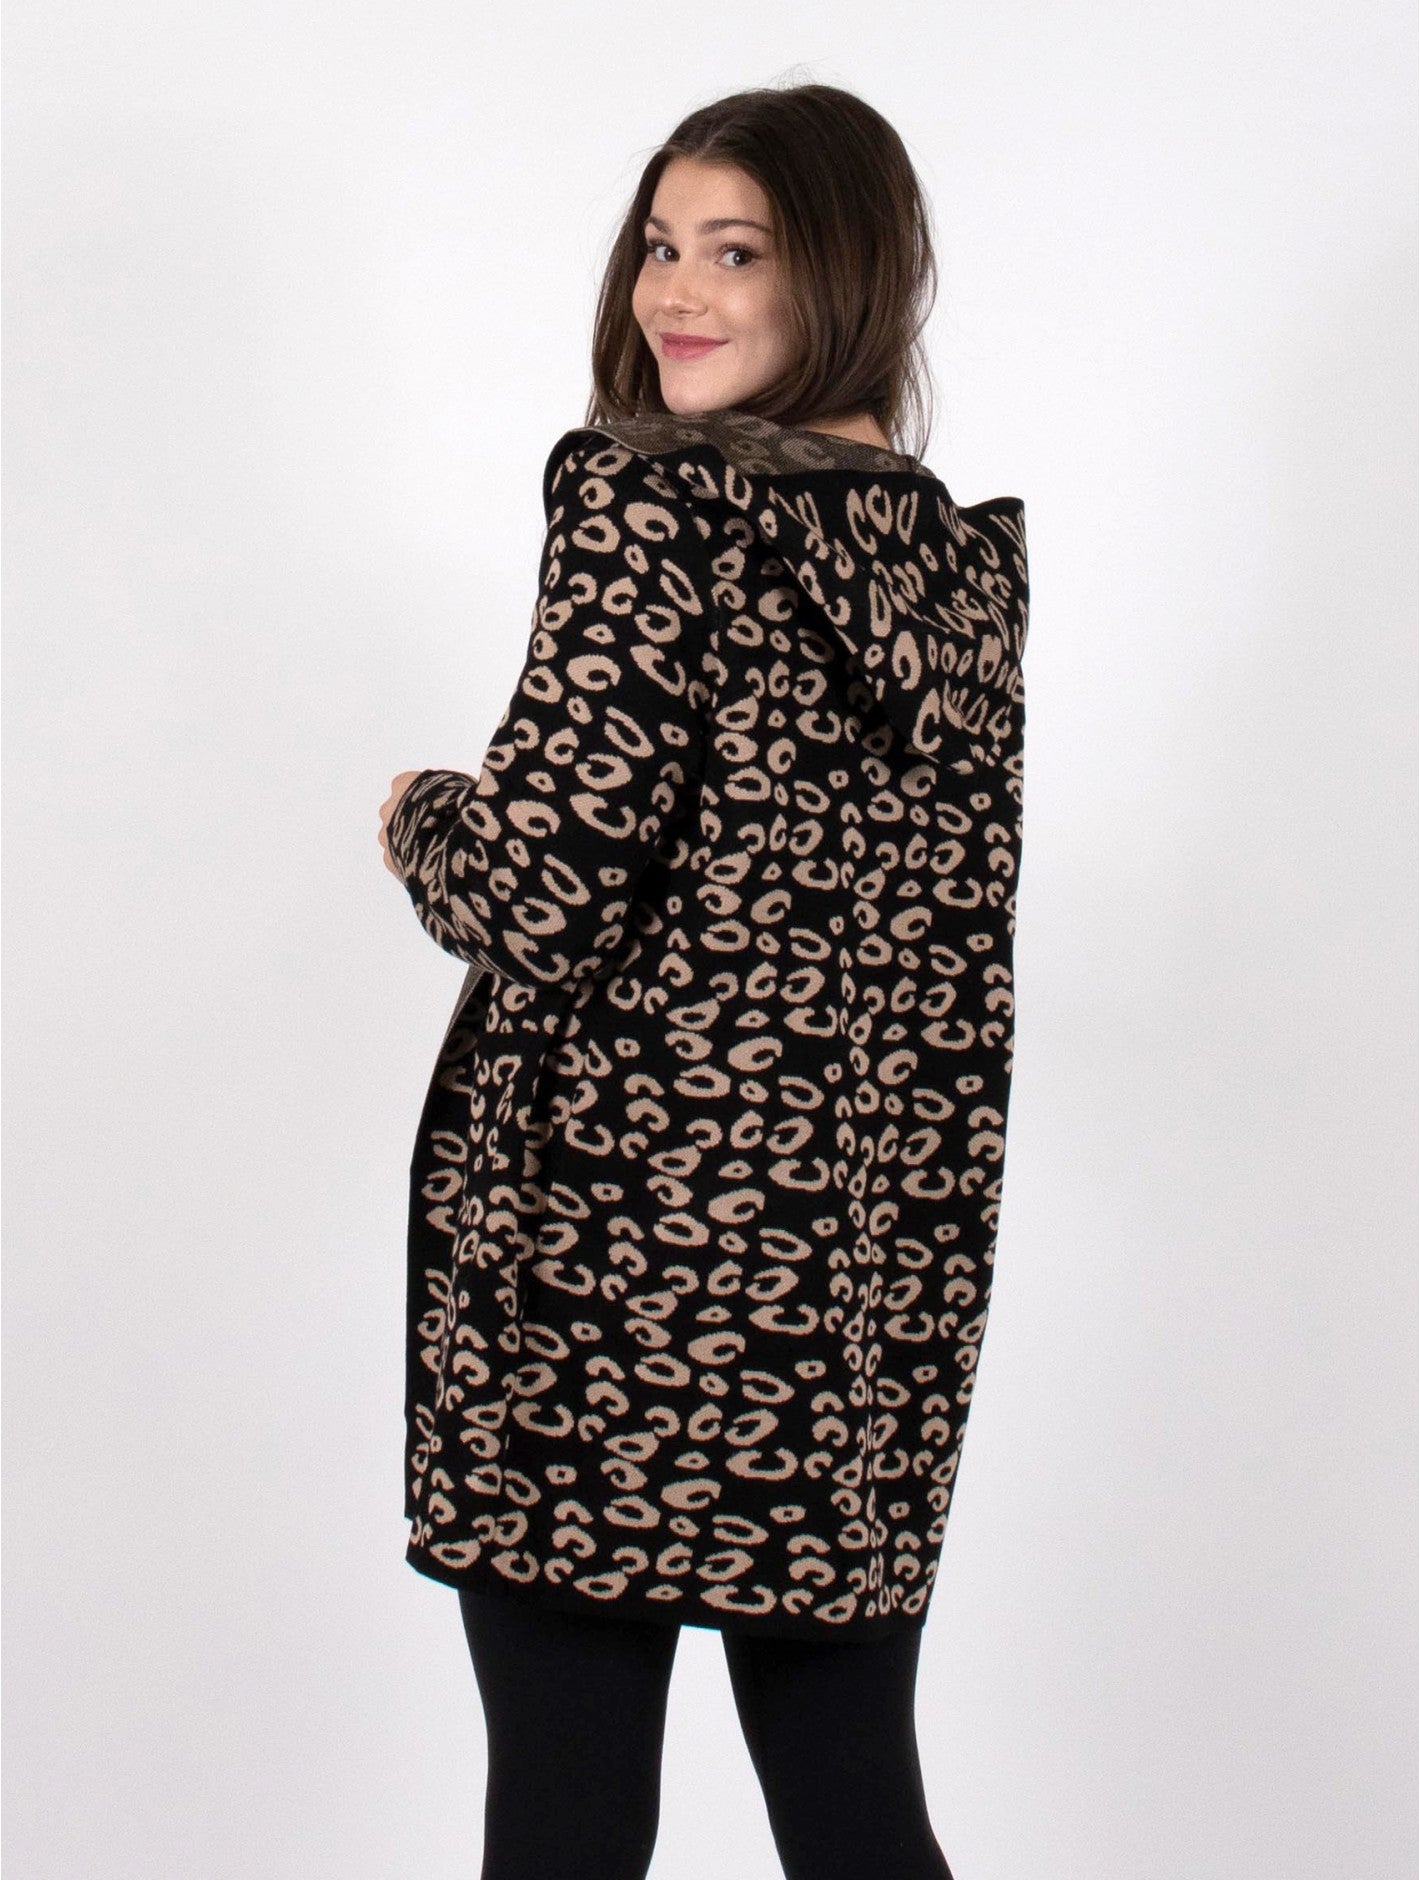 Black Leopard Print Cardigan with Hood (2 Sizes Available)